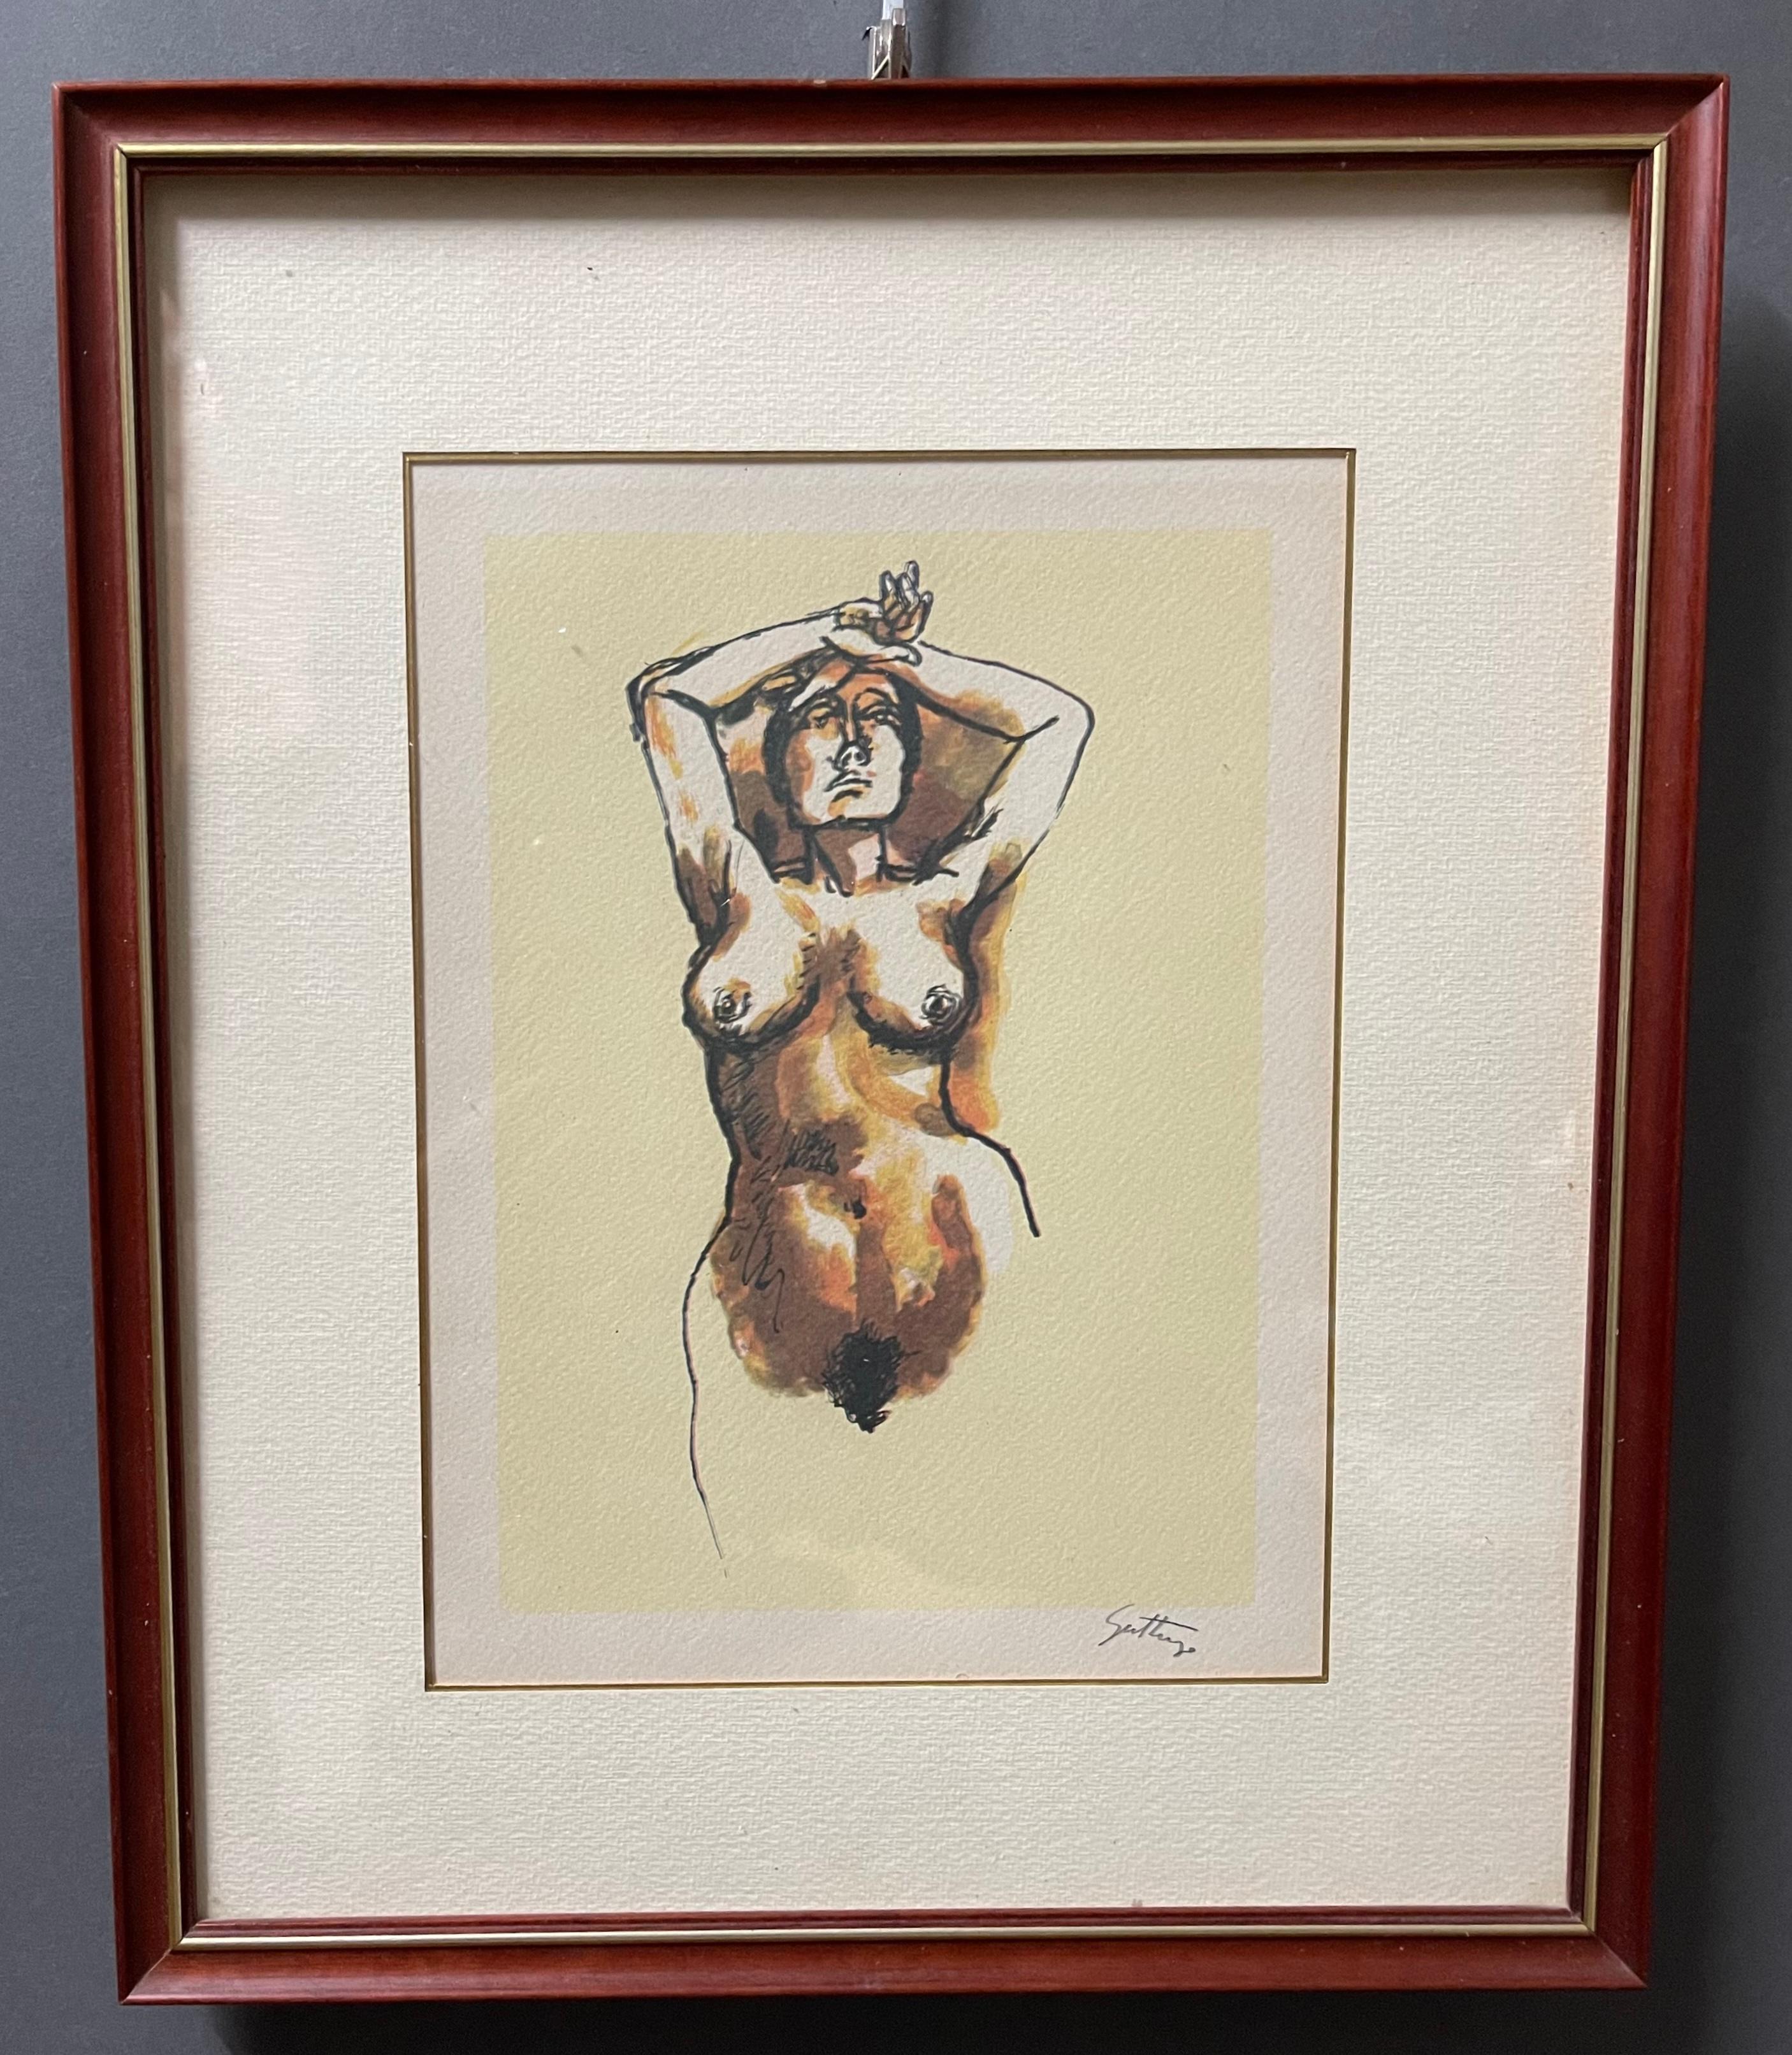 Renato Guttuso Signed and Colored Nude Etching 1